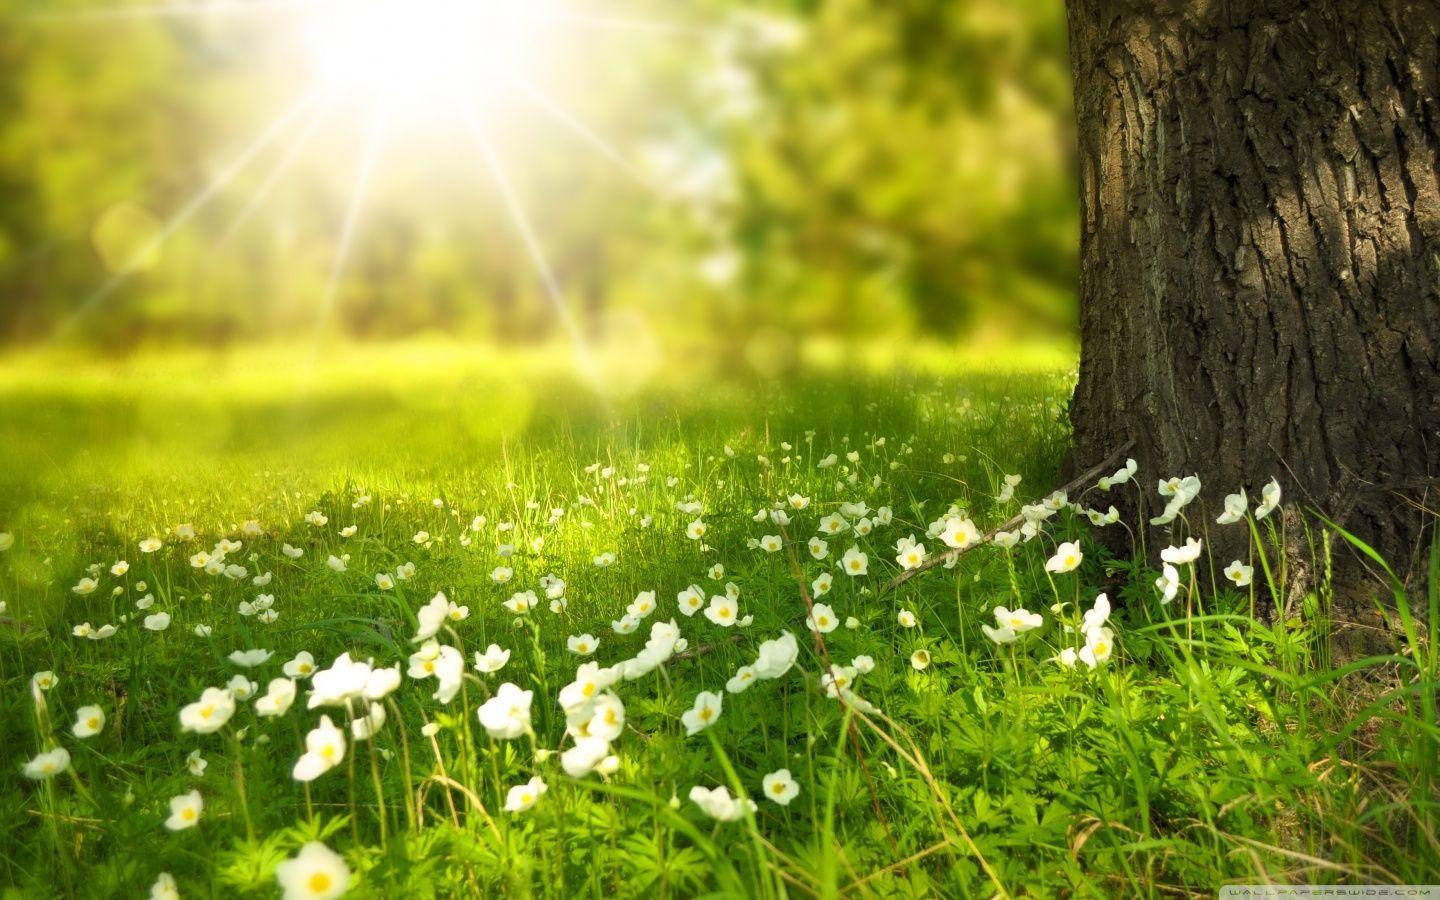 about Spring Wallpaper HD. Spring cover